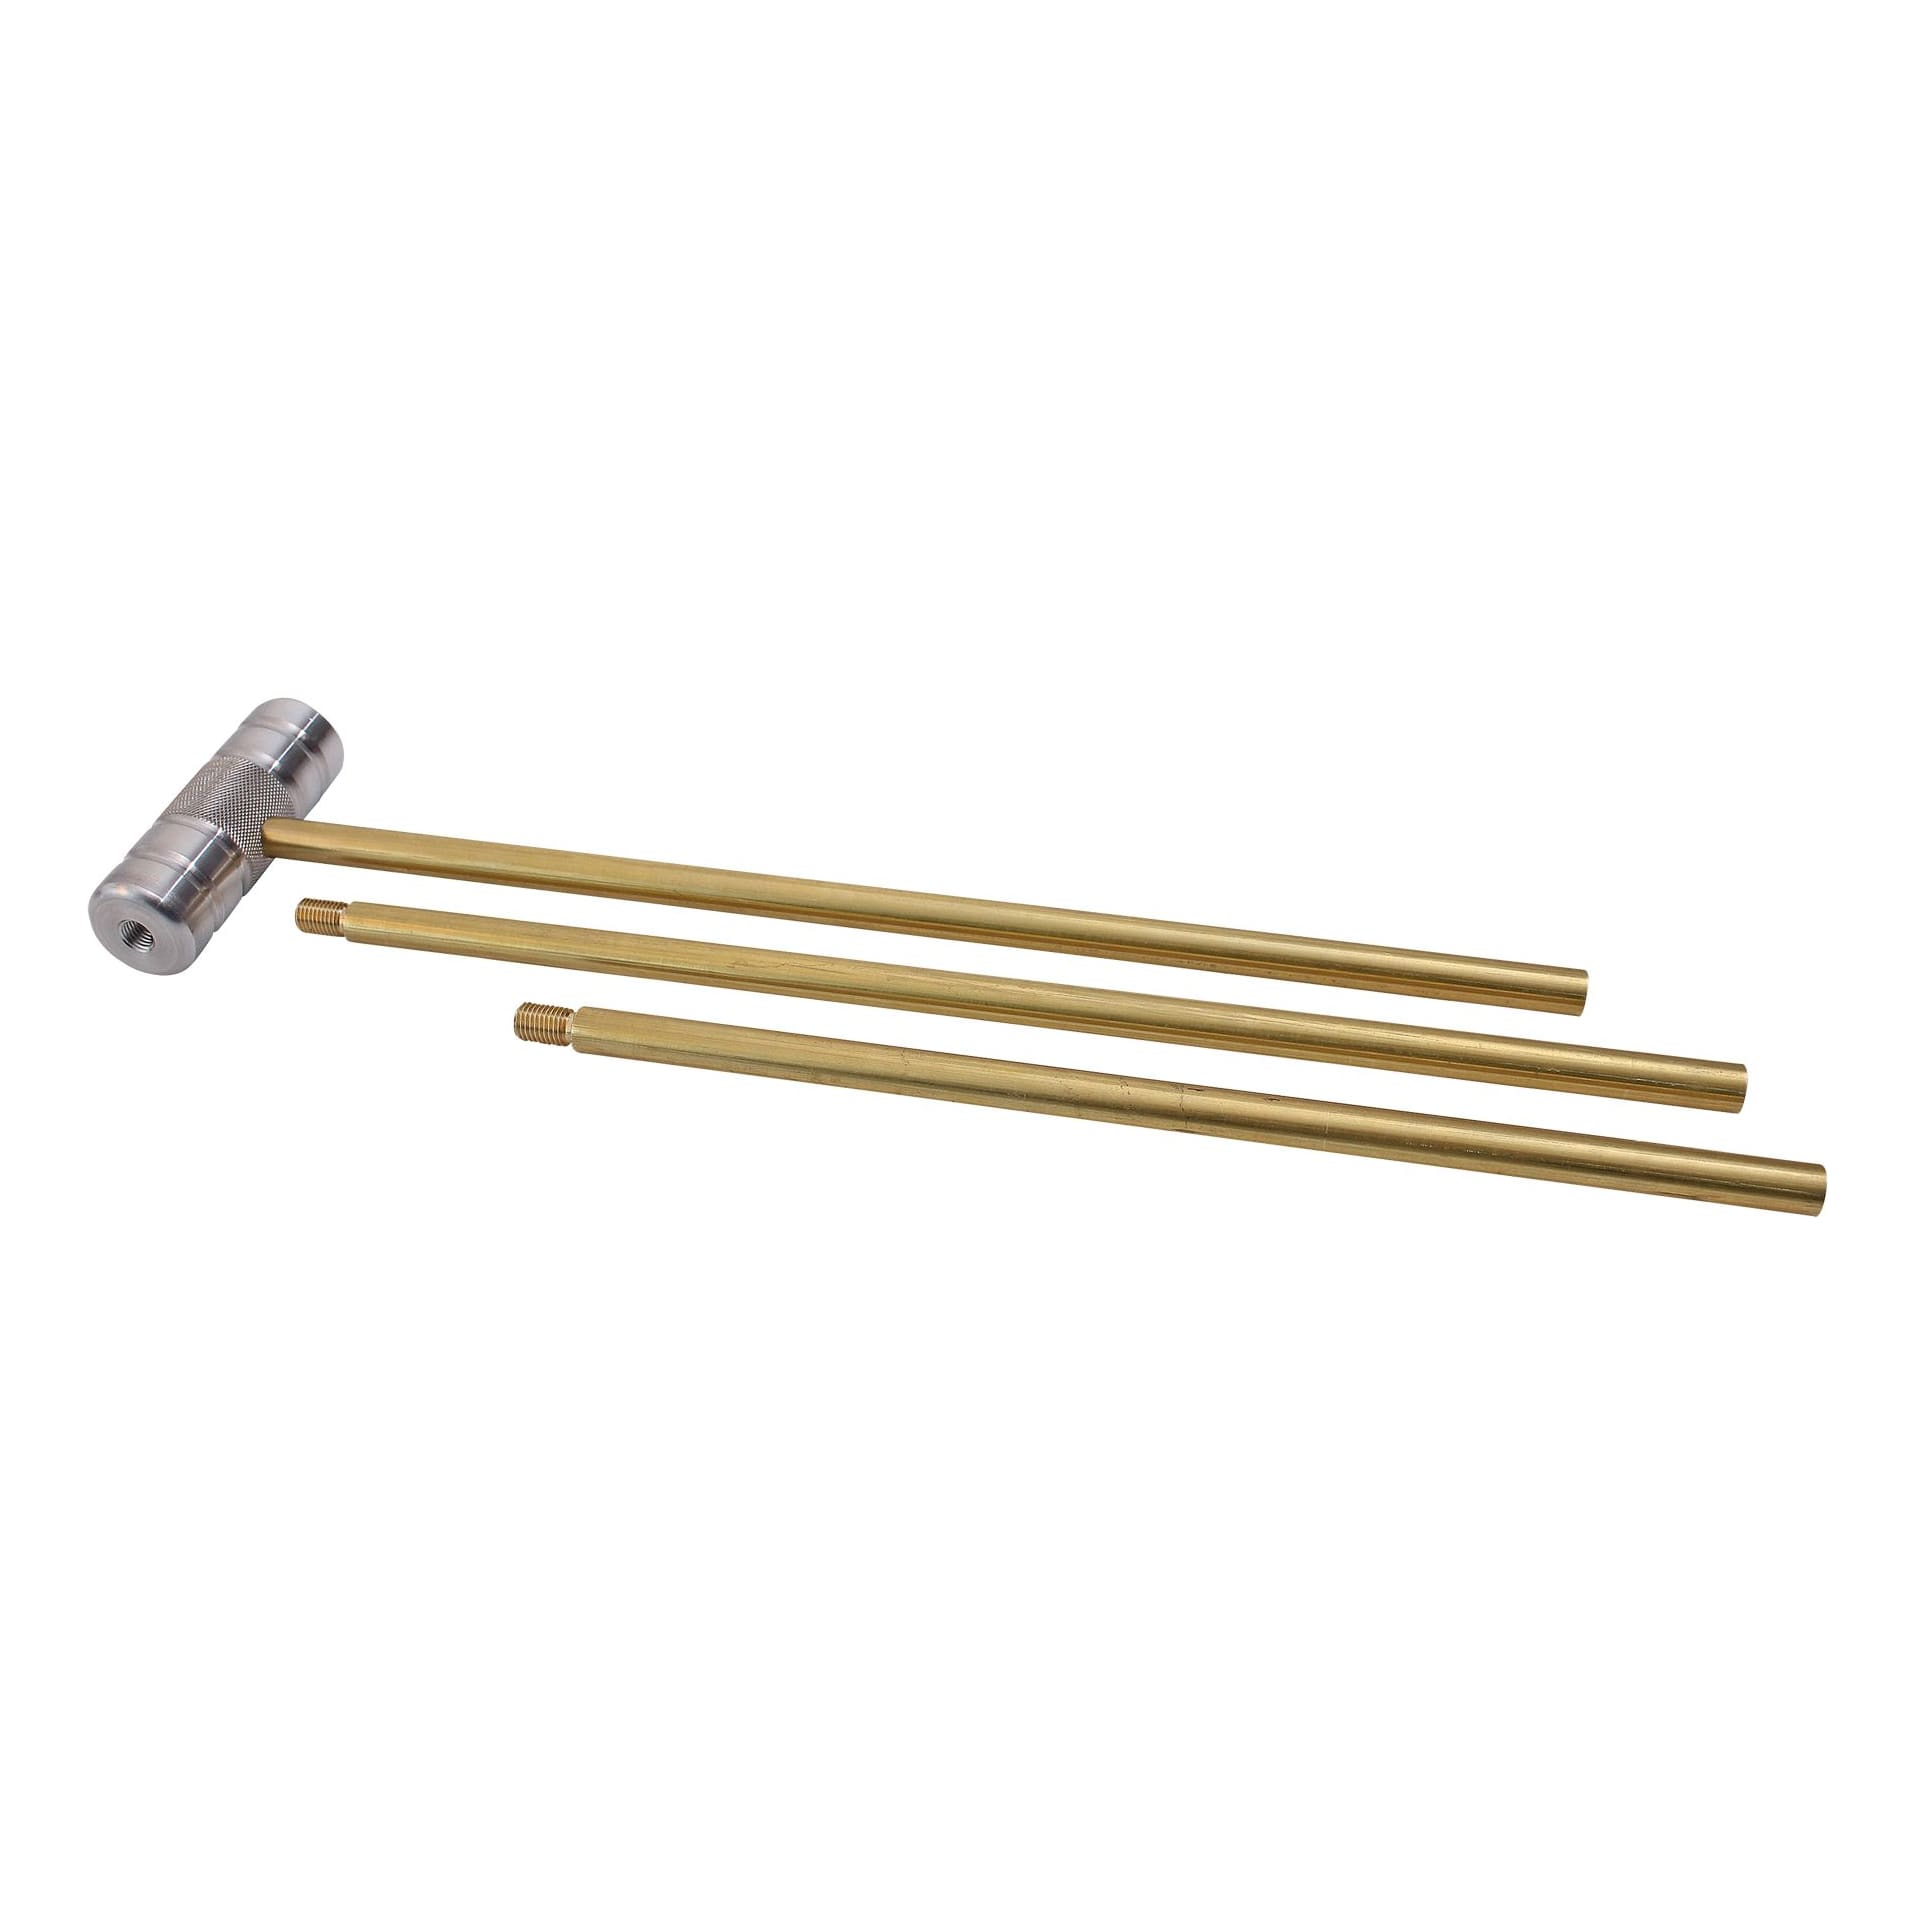 Traditions™ Ultimate Loading/Cleaning Rod